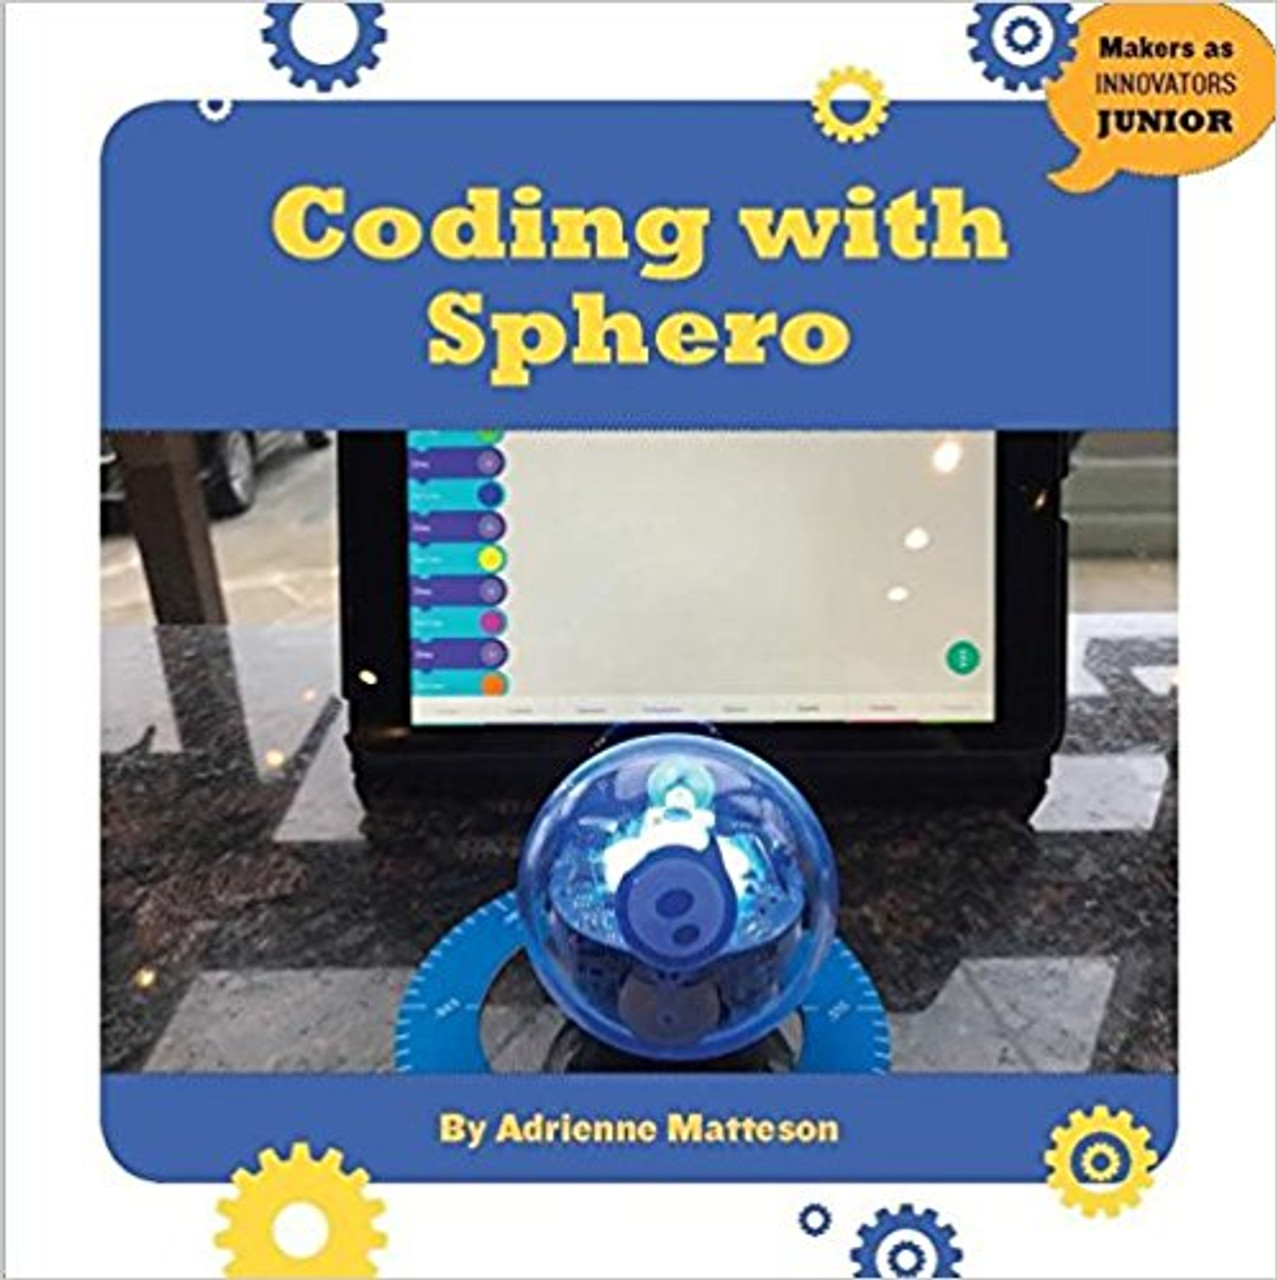 Coding with Sphero by Adrienne Matteson